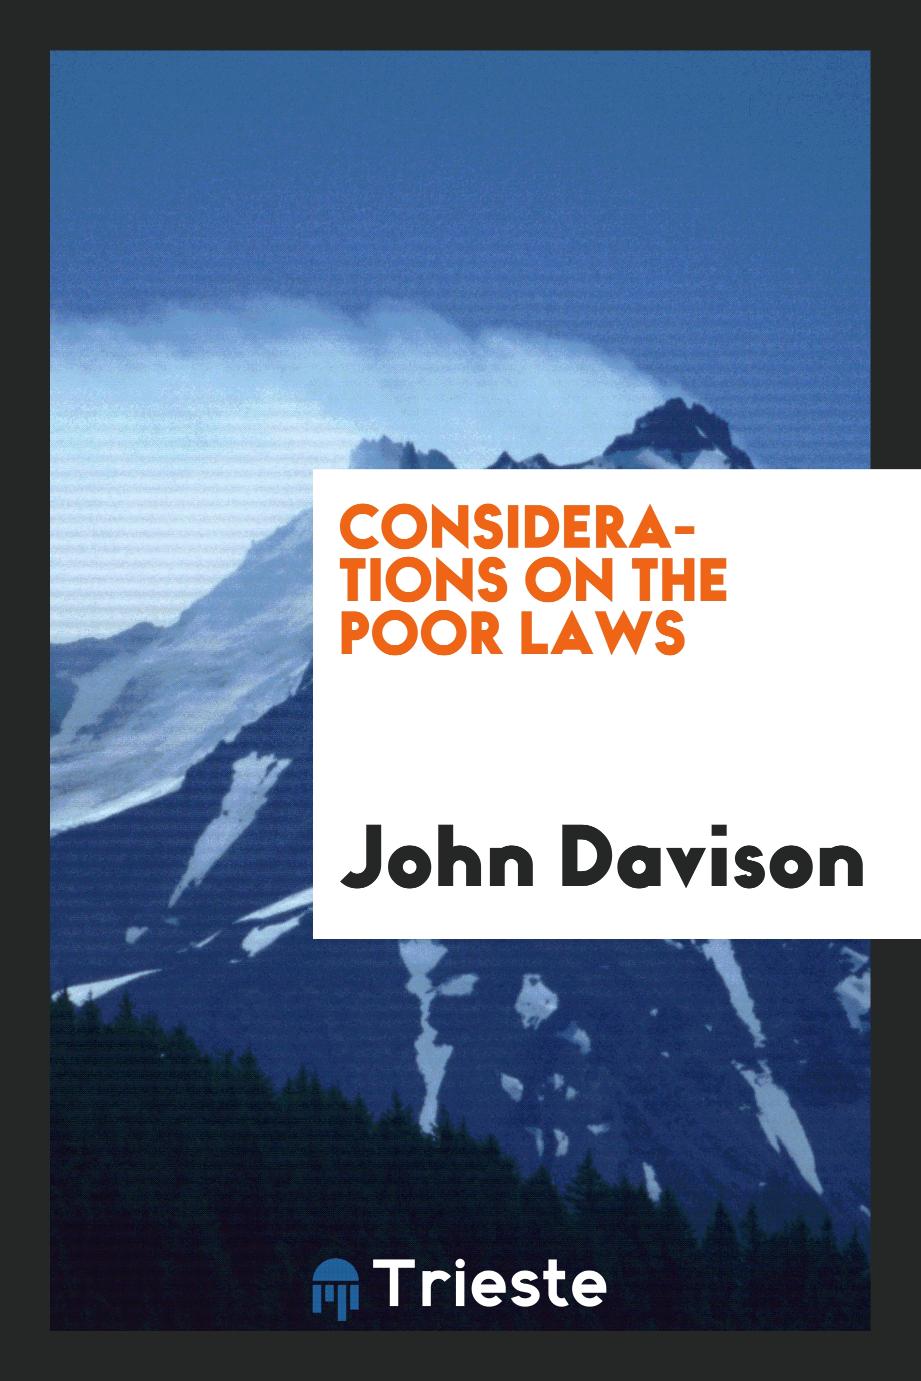 Considerations on the poor laws